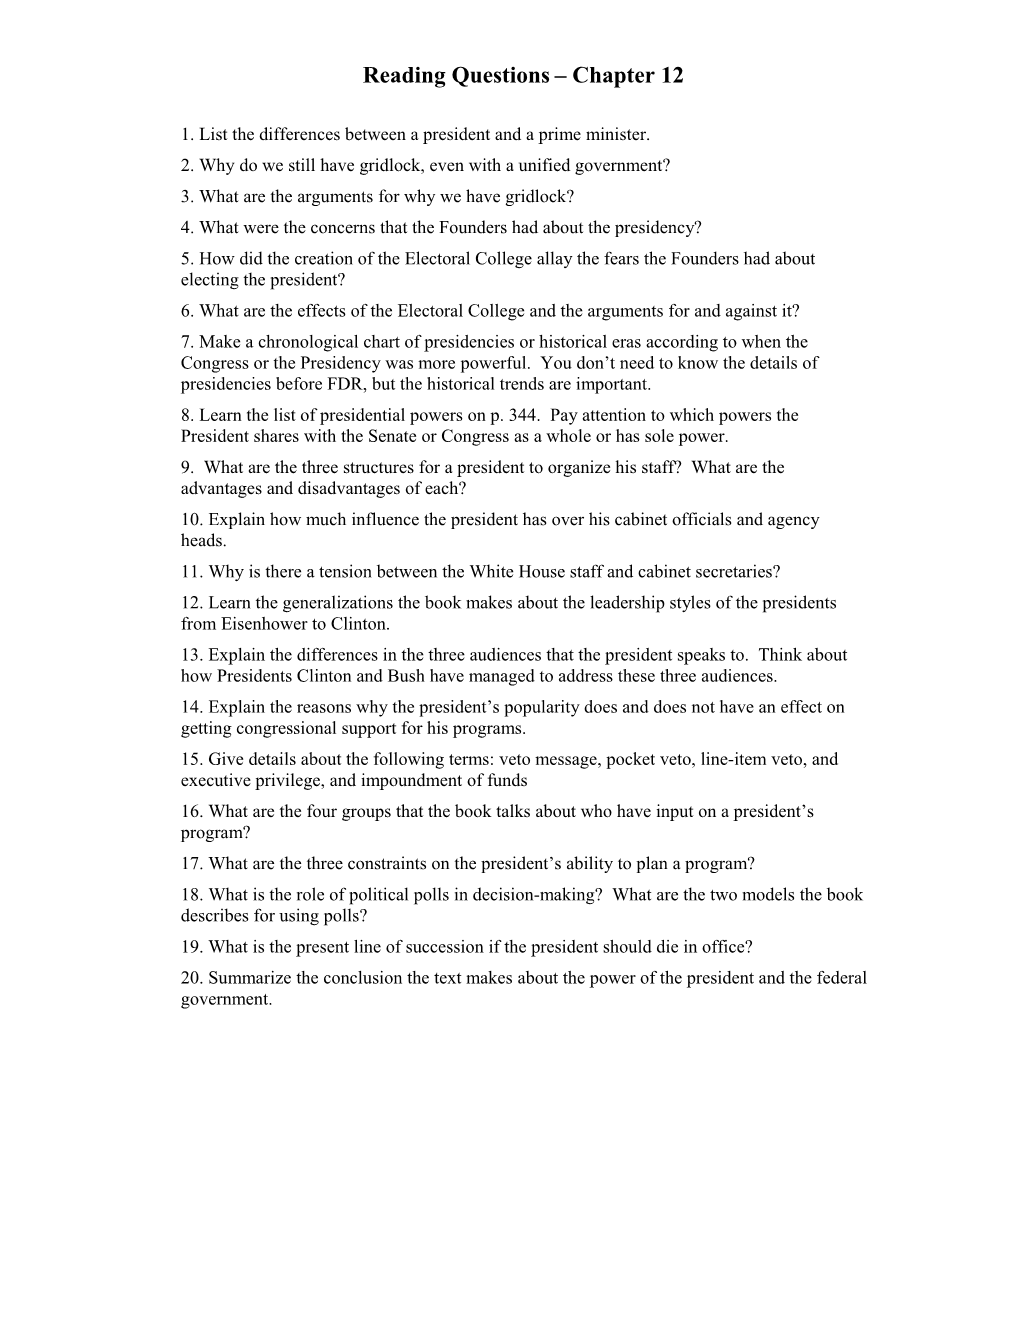 Reading Questions Chapter 12